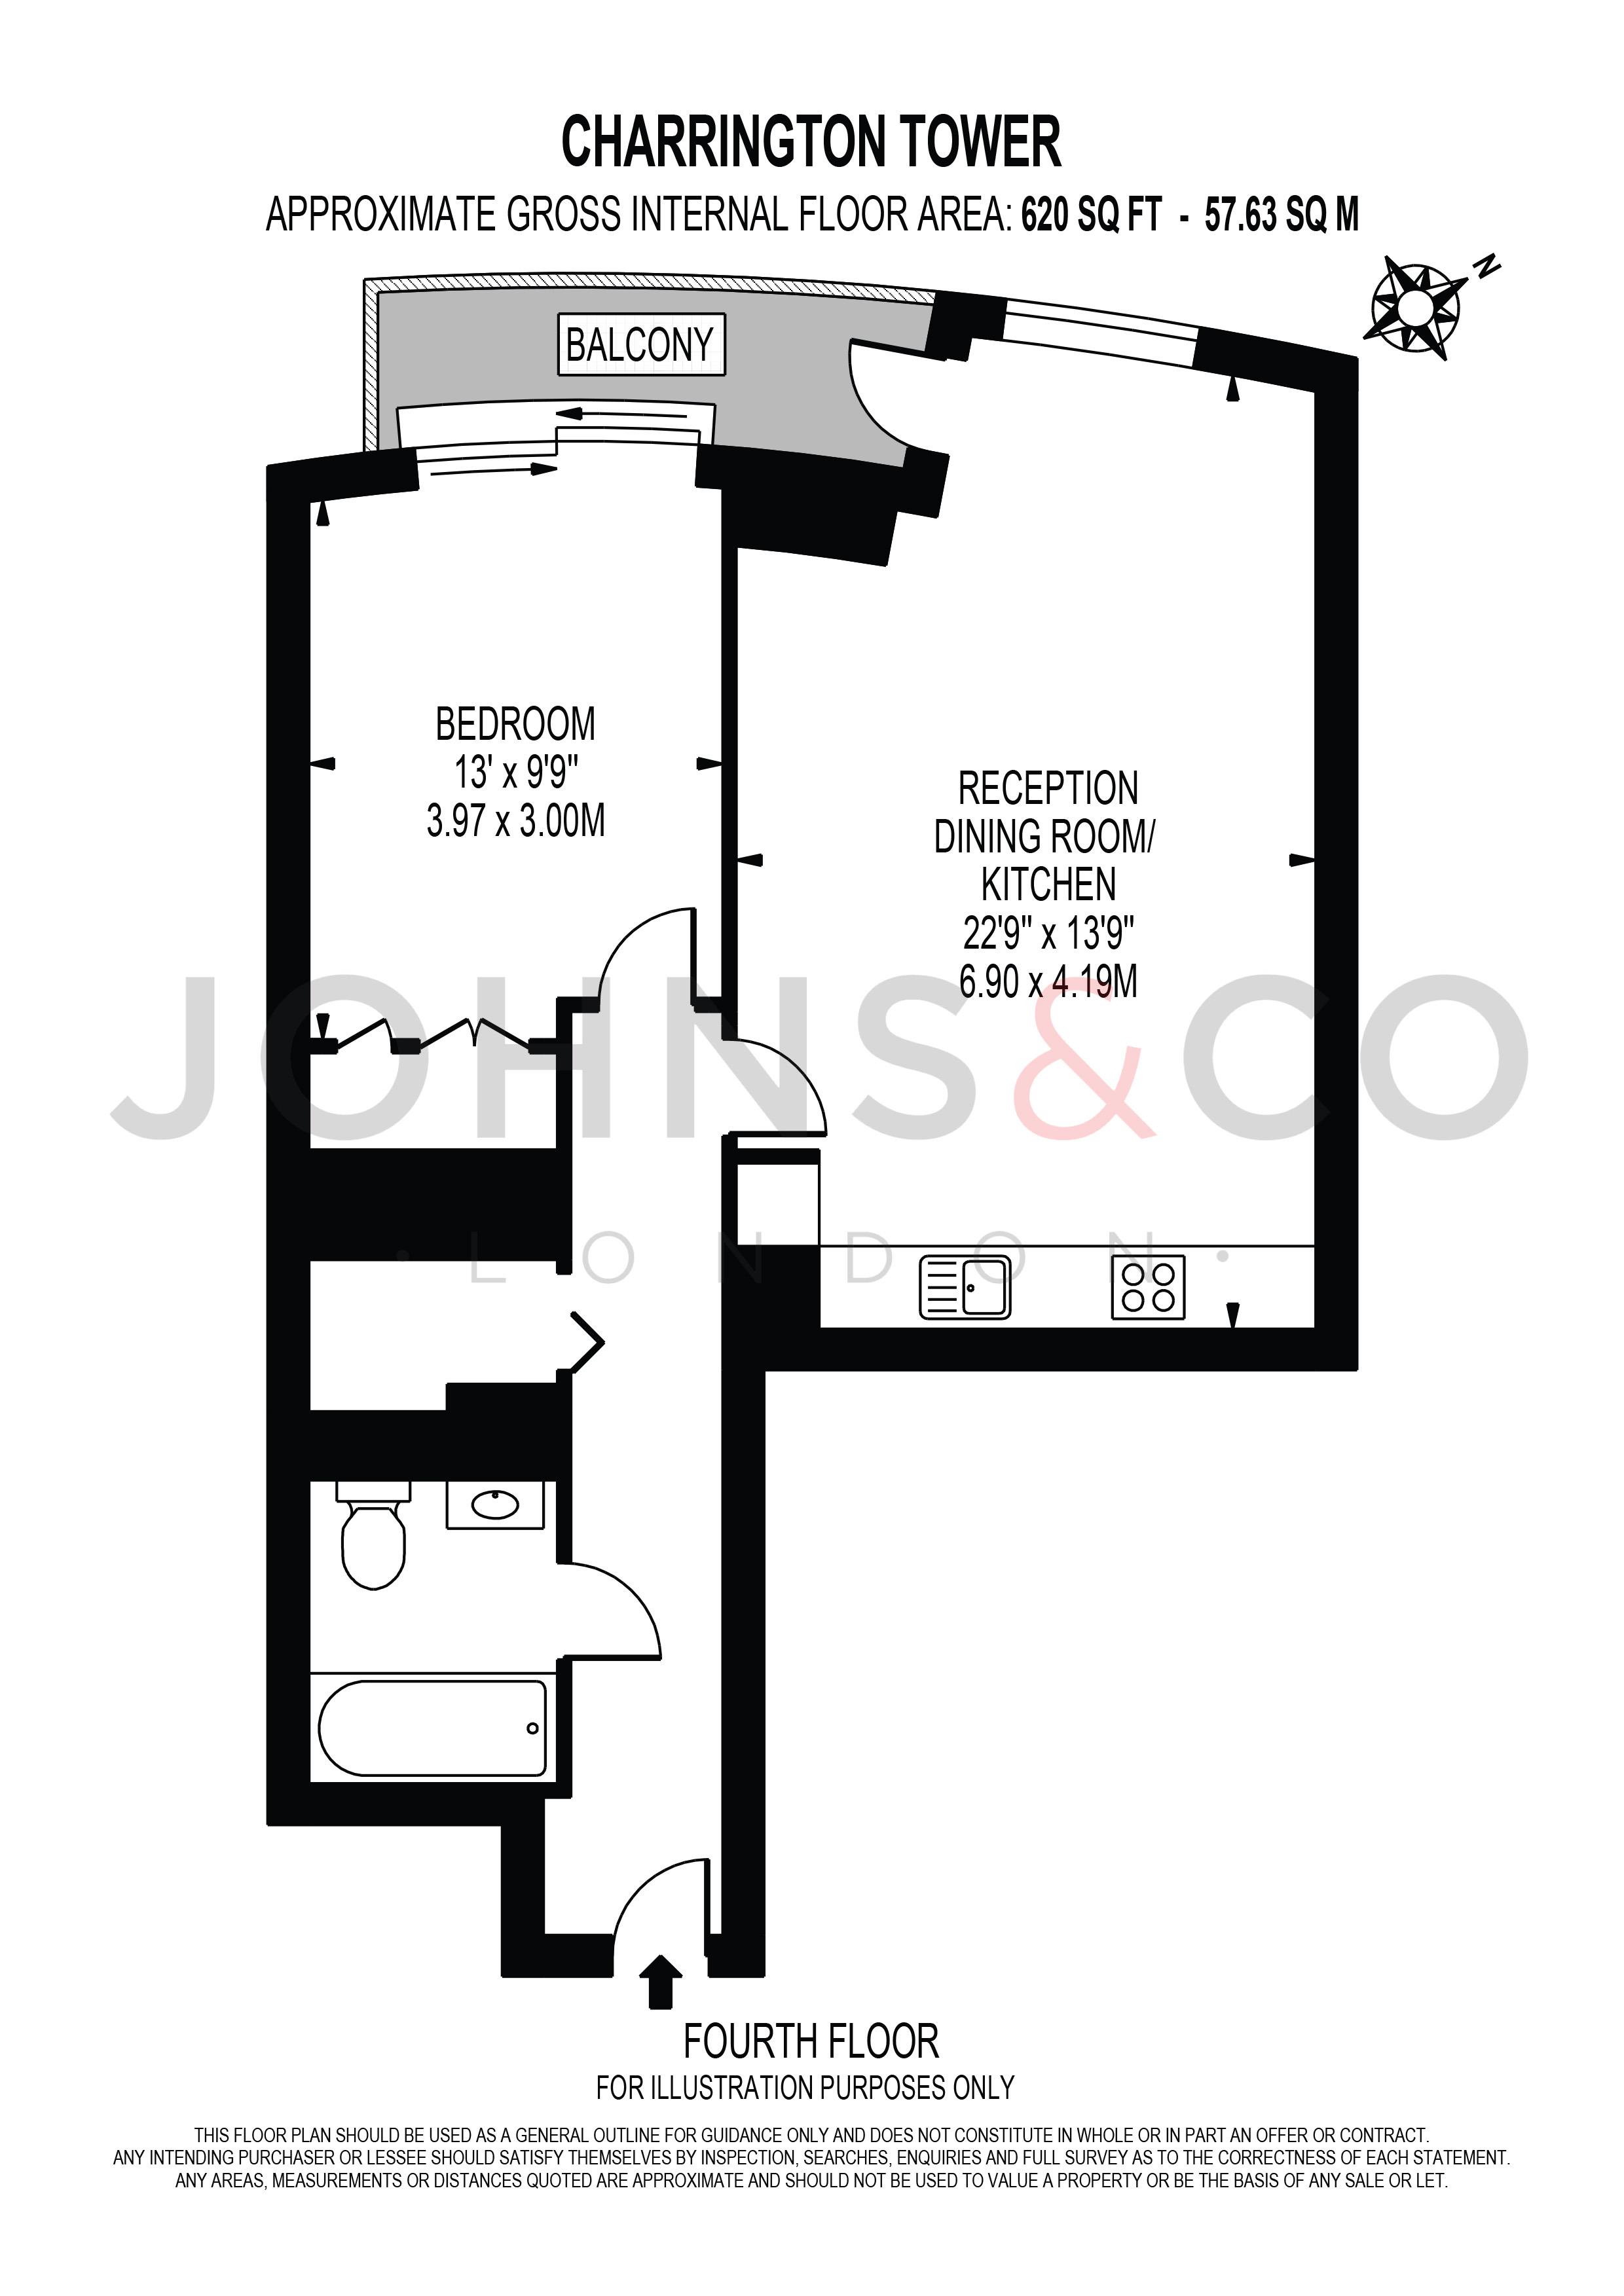 1 Bedrooms Flat to rent in Charrington Tower, Canary Wharf, London E14